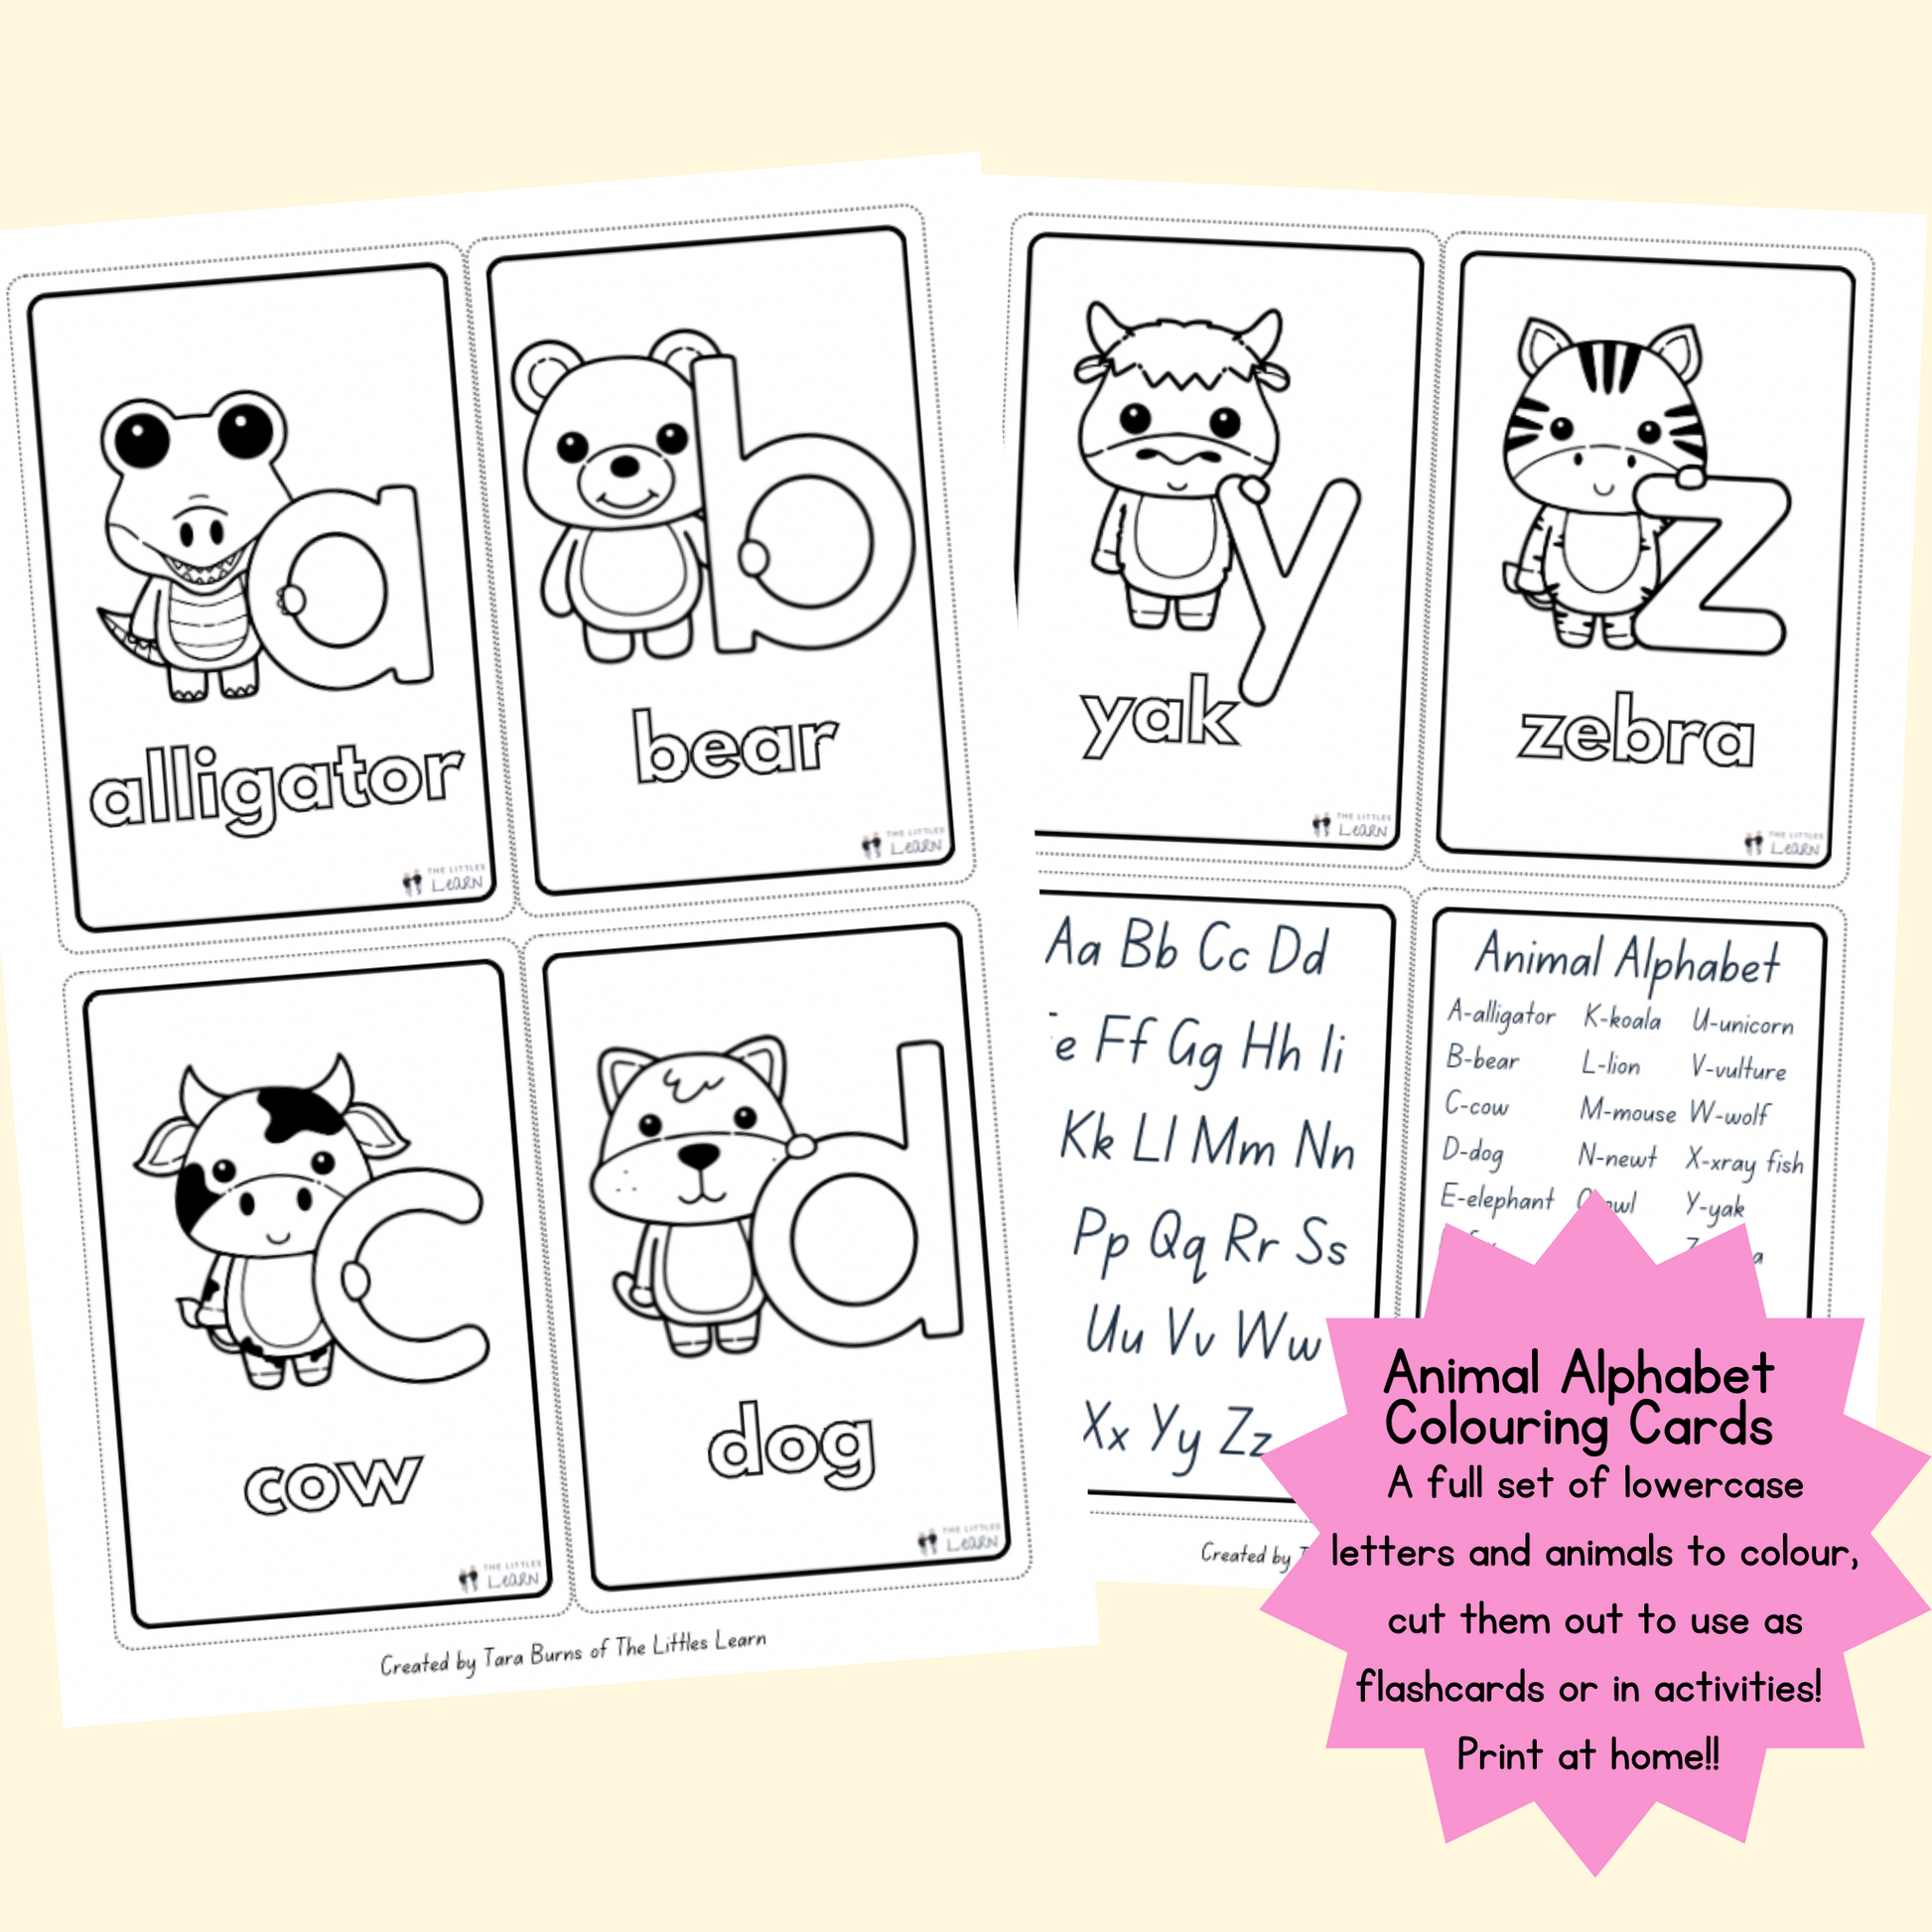 Printable flashcards featuring lowercase letters and cute animals for children to colour in.